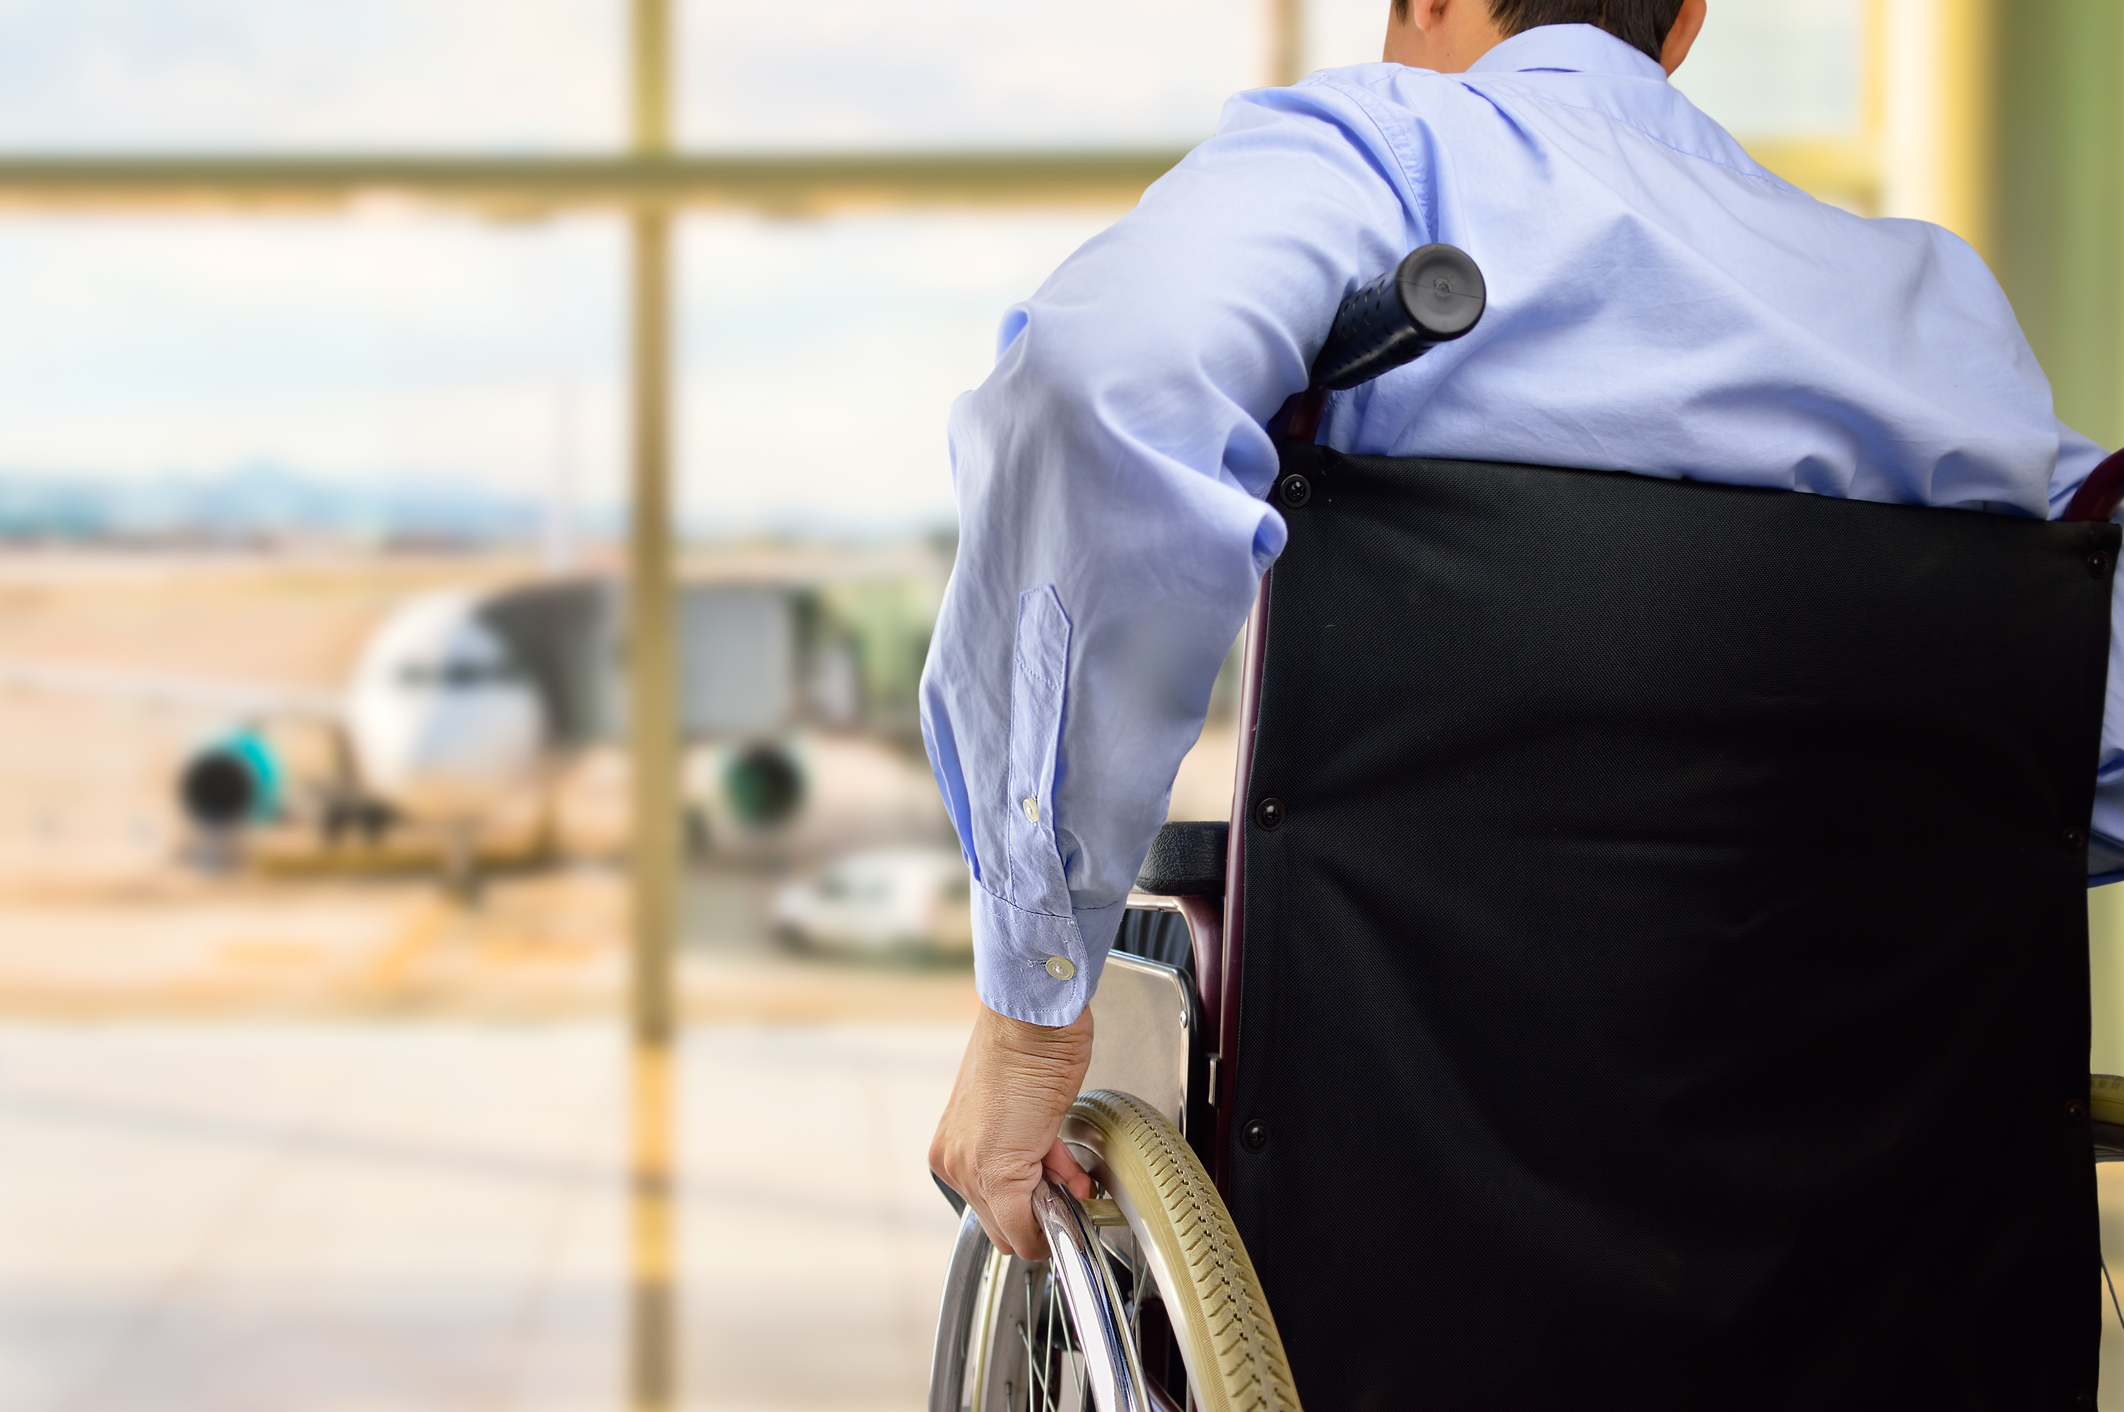 Accessibility in an airport